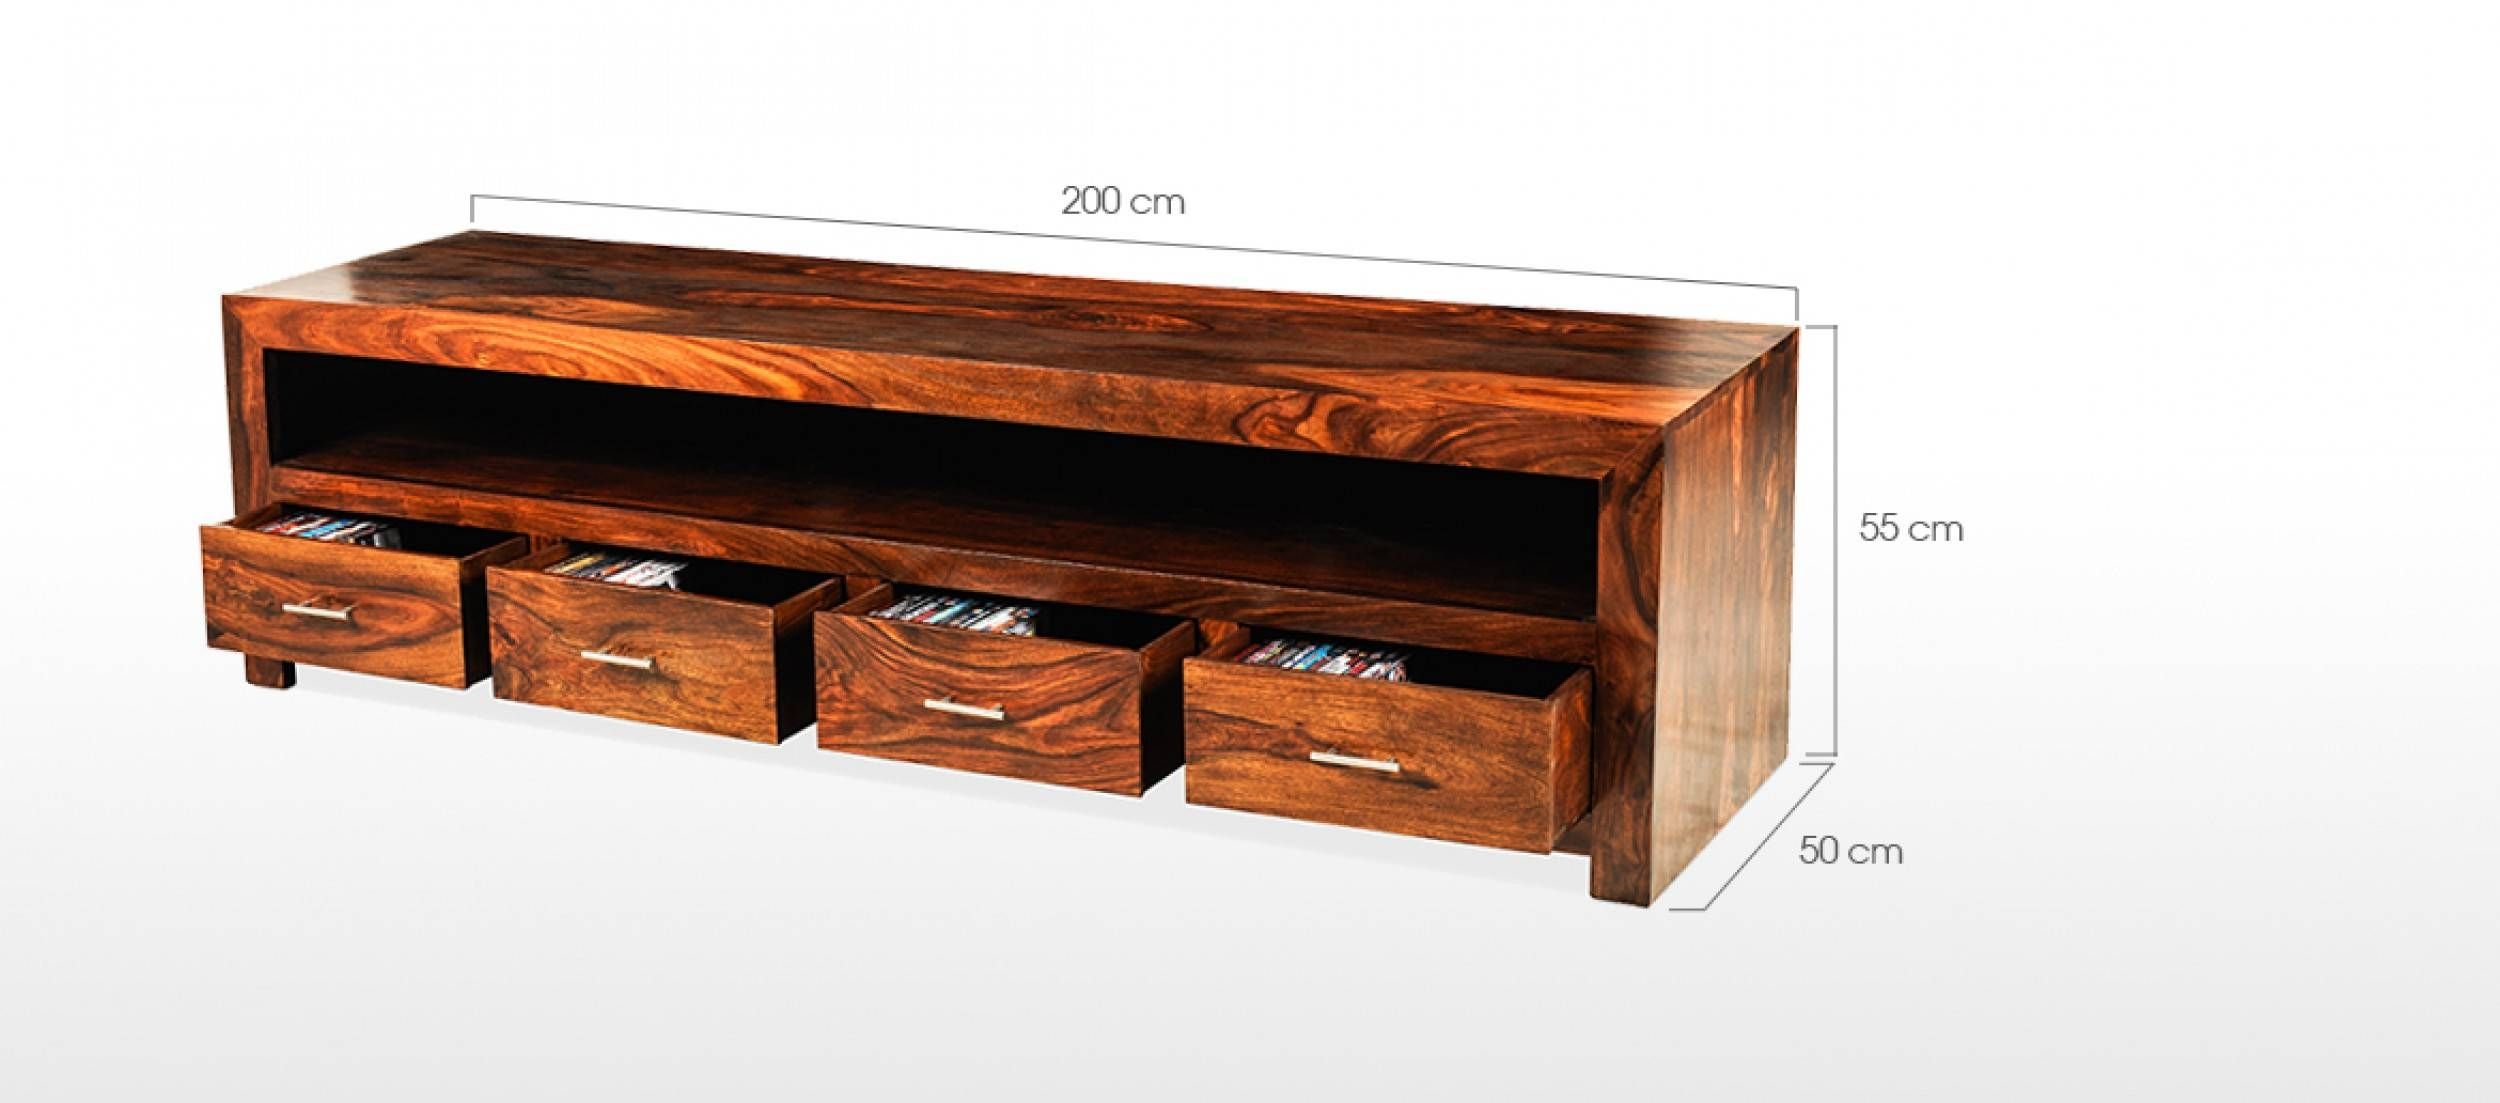 Cube Sheesham Long Plasma Tv Cabinet | Quercus Living Pertaining To Wide Tv Cabinets (View 4 of 15)